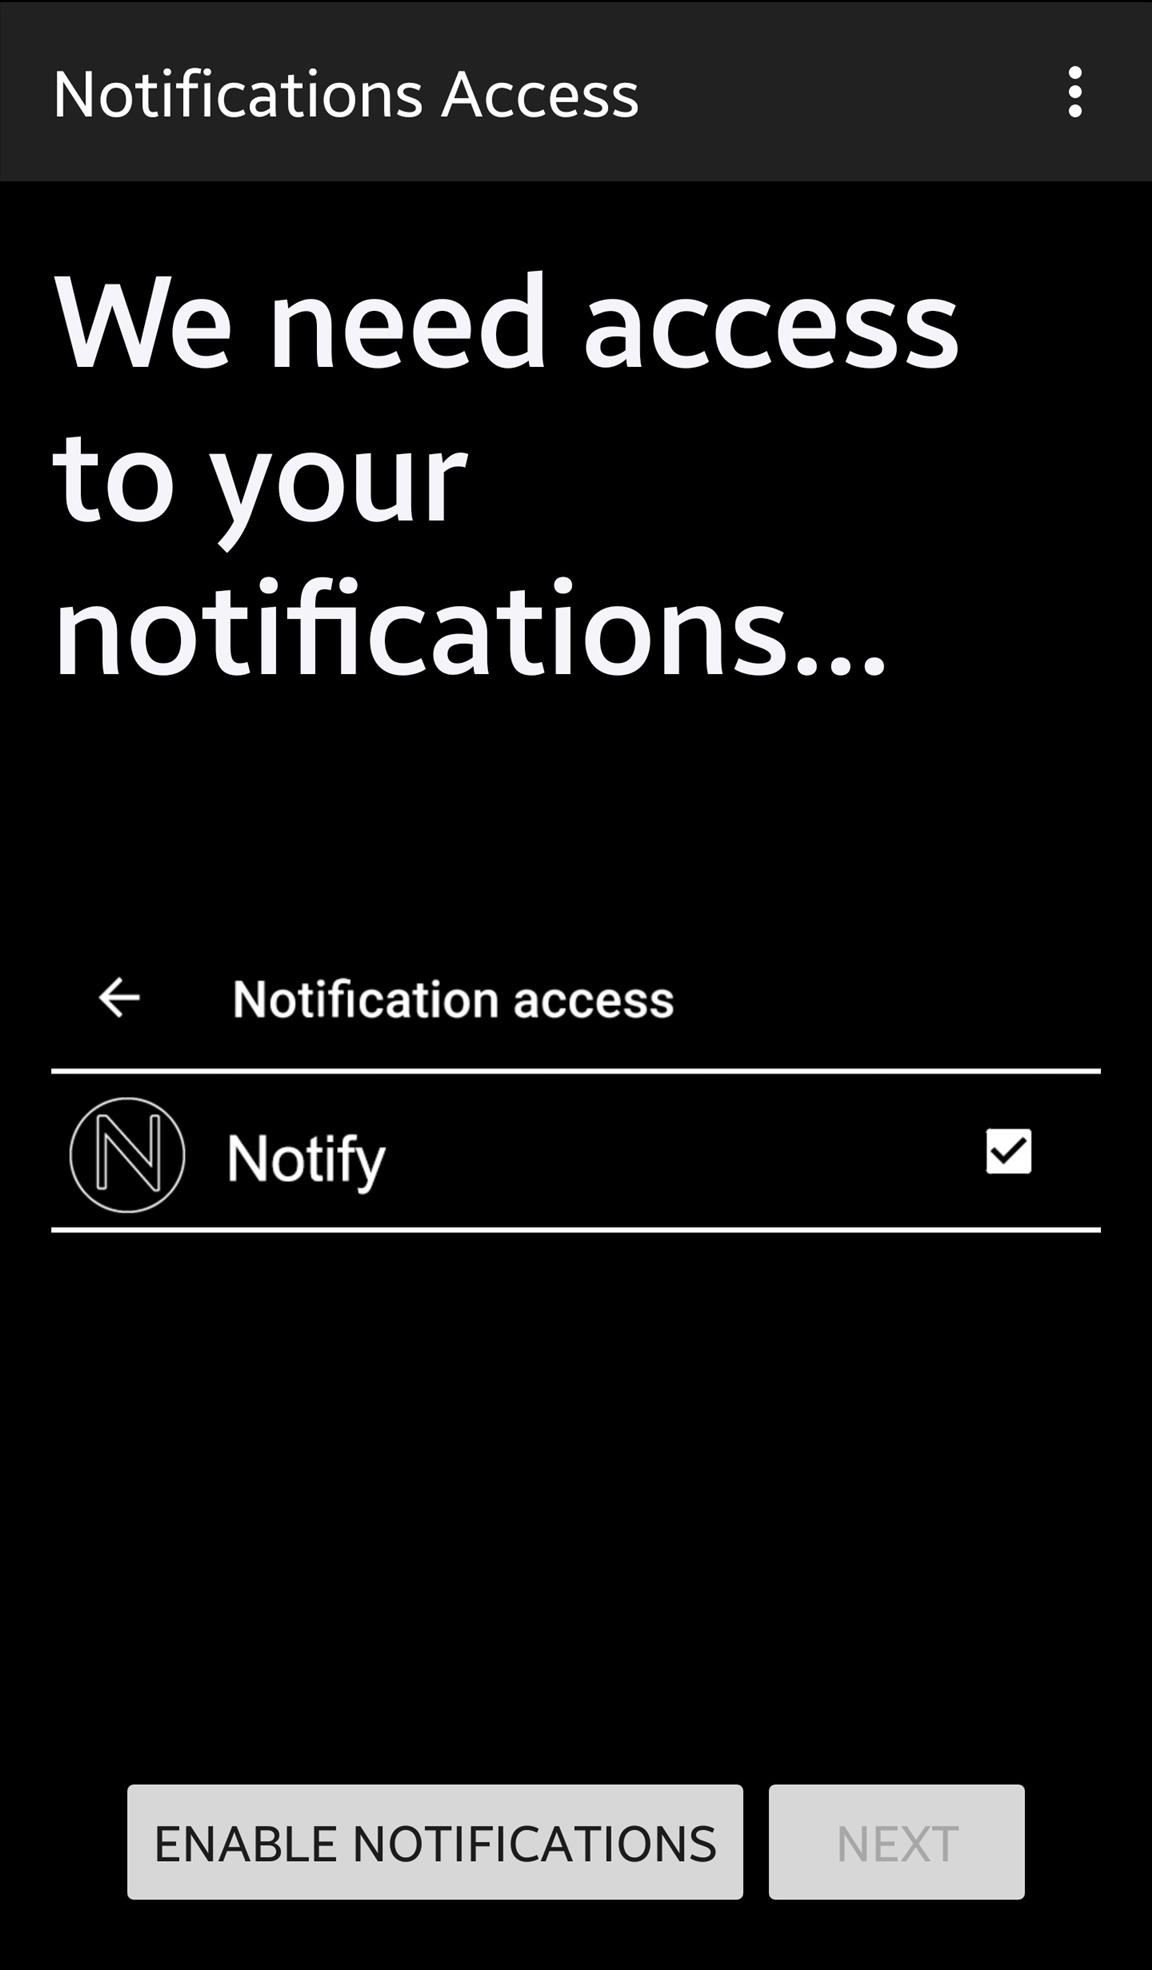 How to Color Code Android Notifications Without Root Access